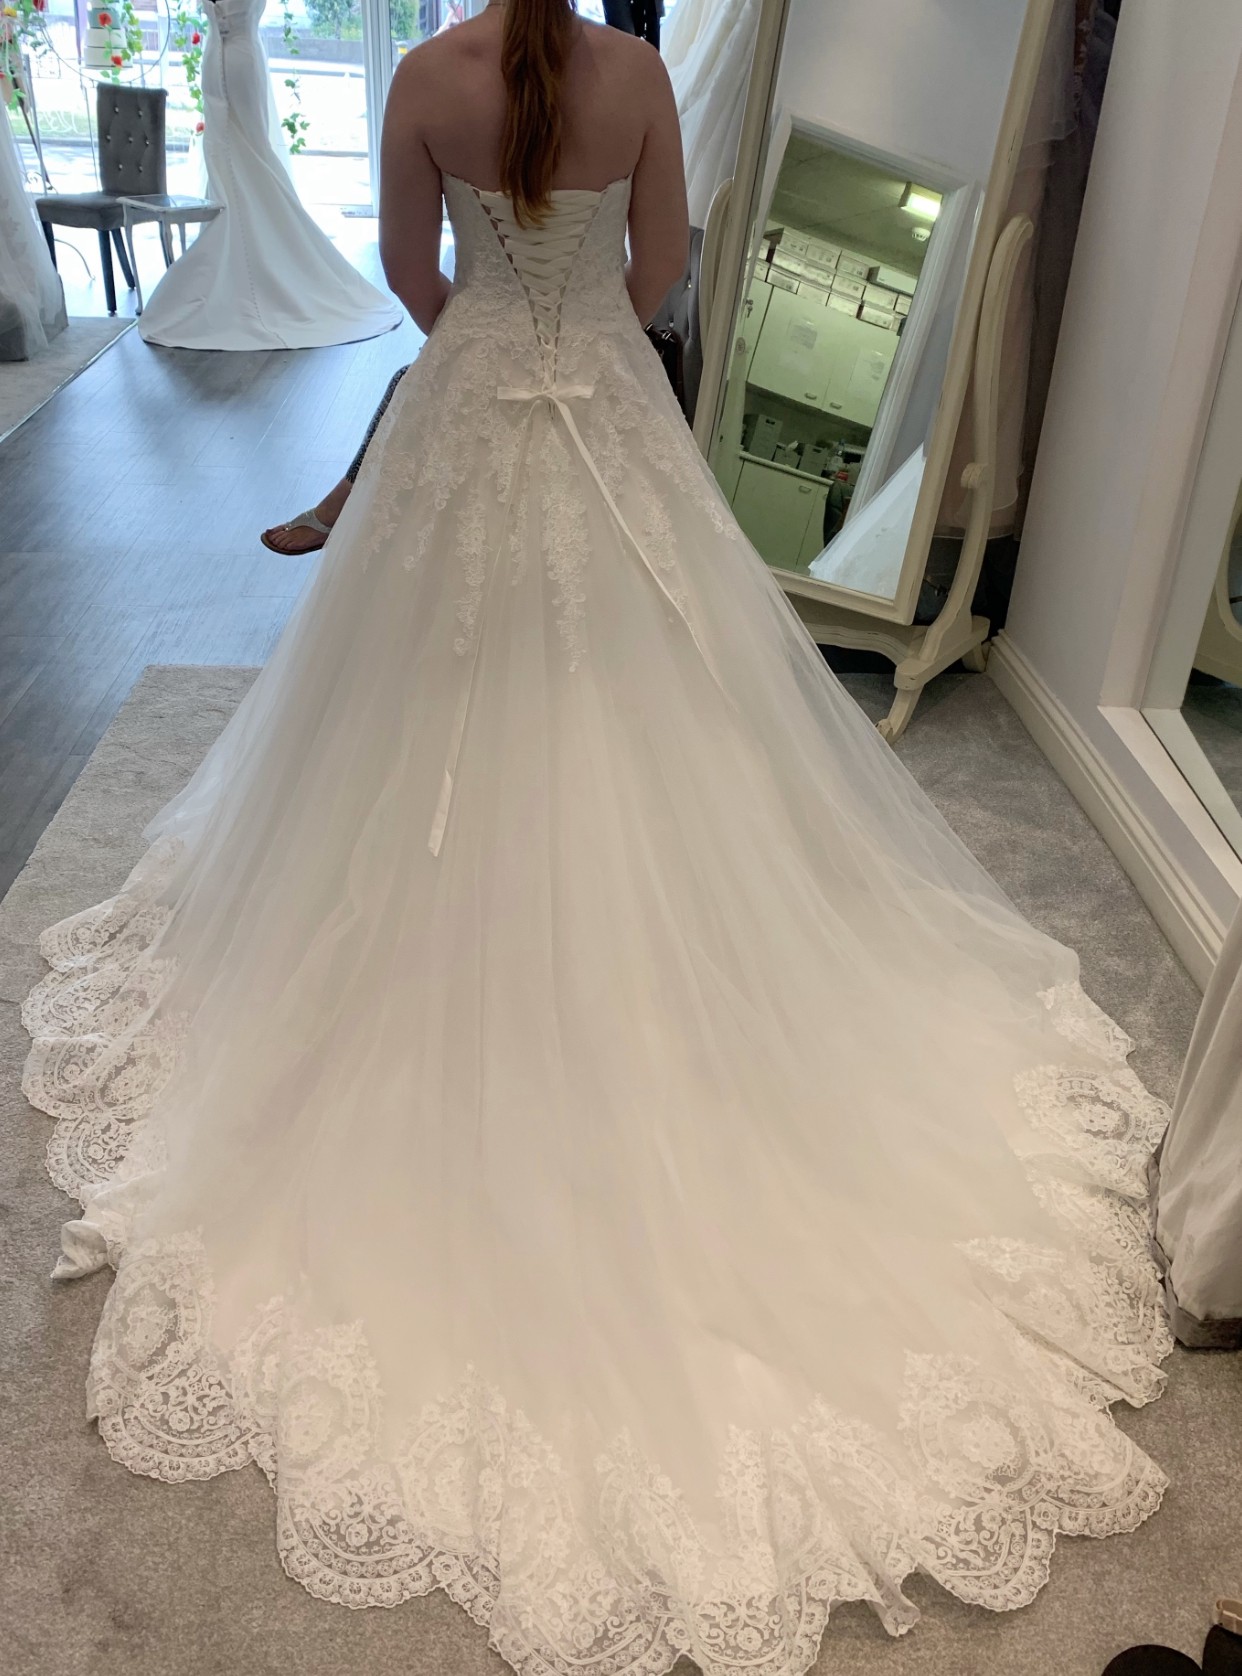 Romantic Ball Gown with Scalloped Lace Edge